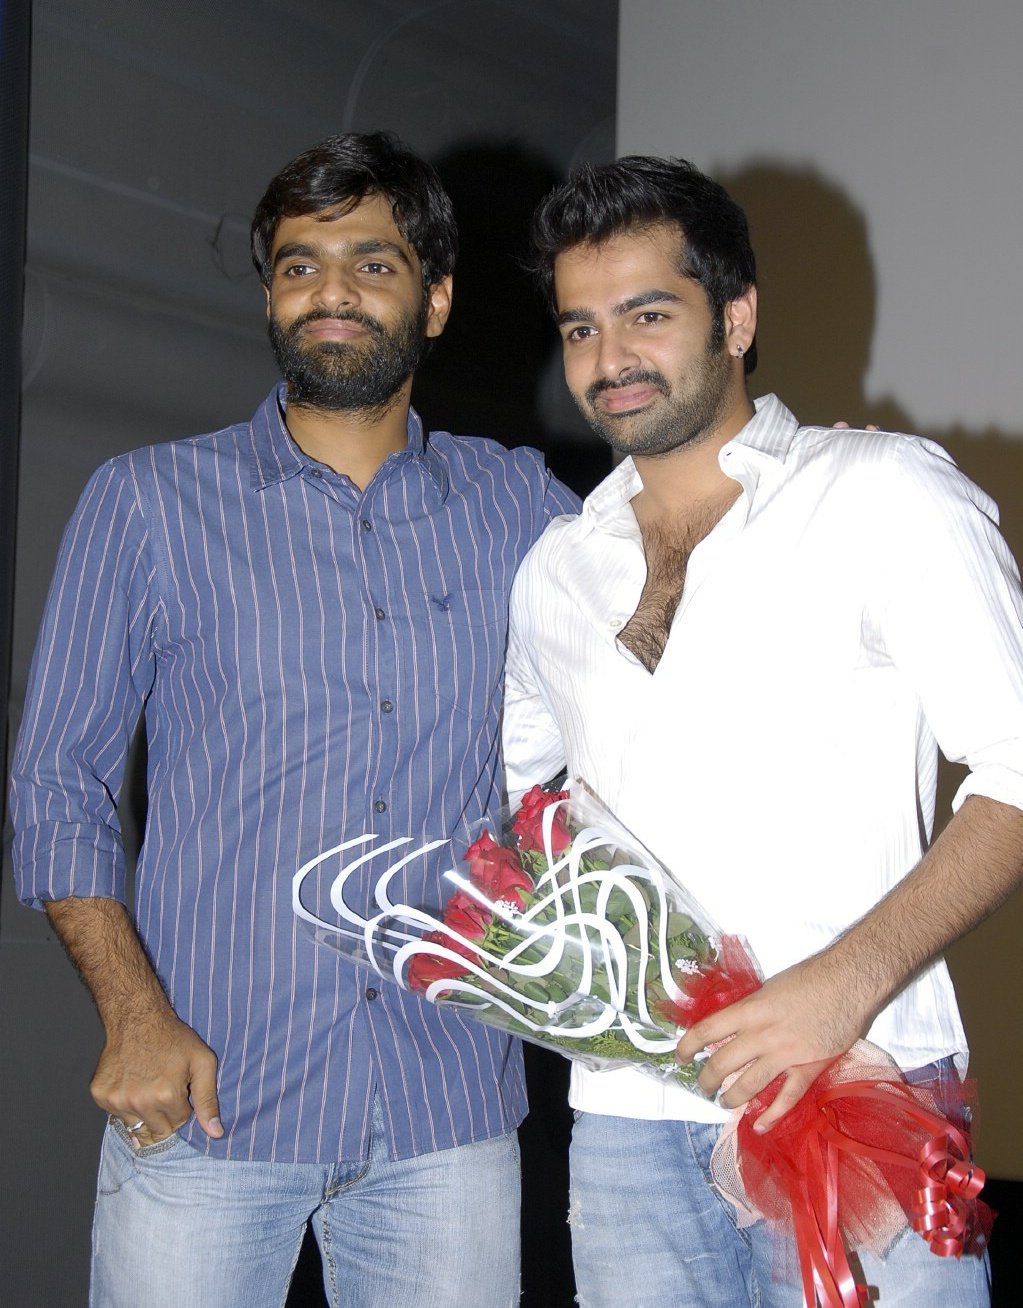 Ram Pothineni Fans Bihar on Twitter: "Happy birthday to the brother of our  ustaad #KrishnaChaitanya 🎂🎂❤️❤️ All The Best For Your Future projects.  👍👍 #HBDKrishnaChaitanya #RAmPOthineni #RAPO #RAPO19  https://t.co/AlarWPtp2p" / Twitter